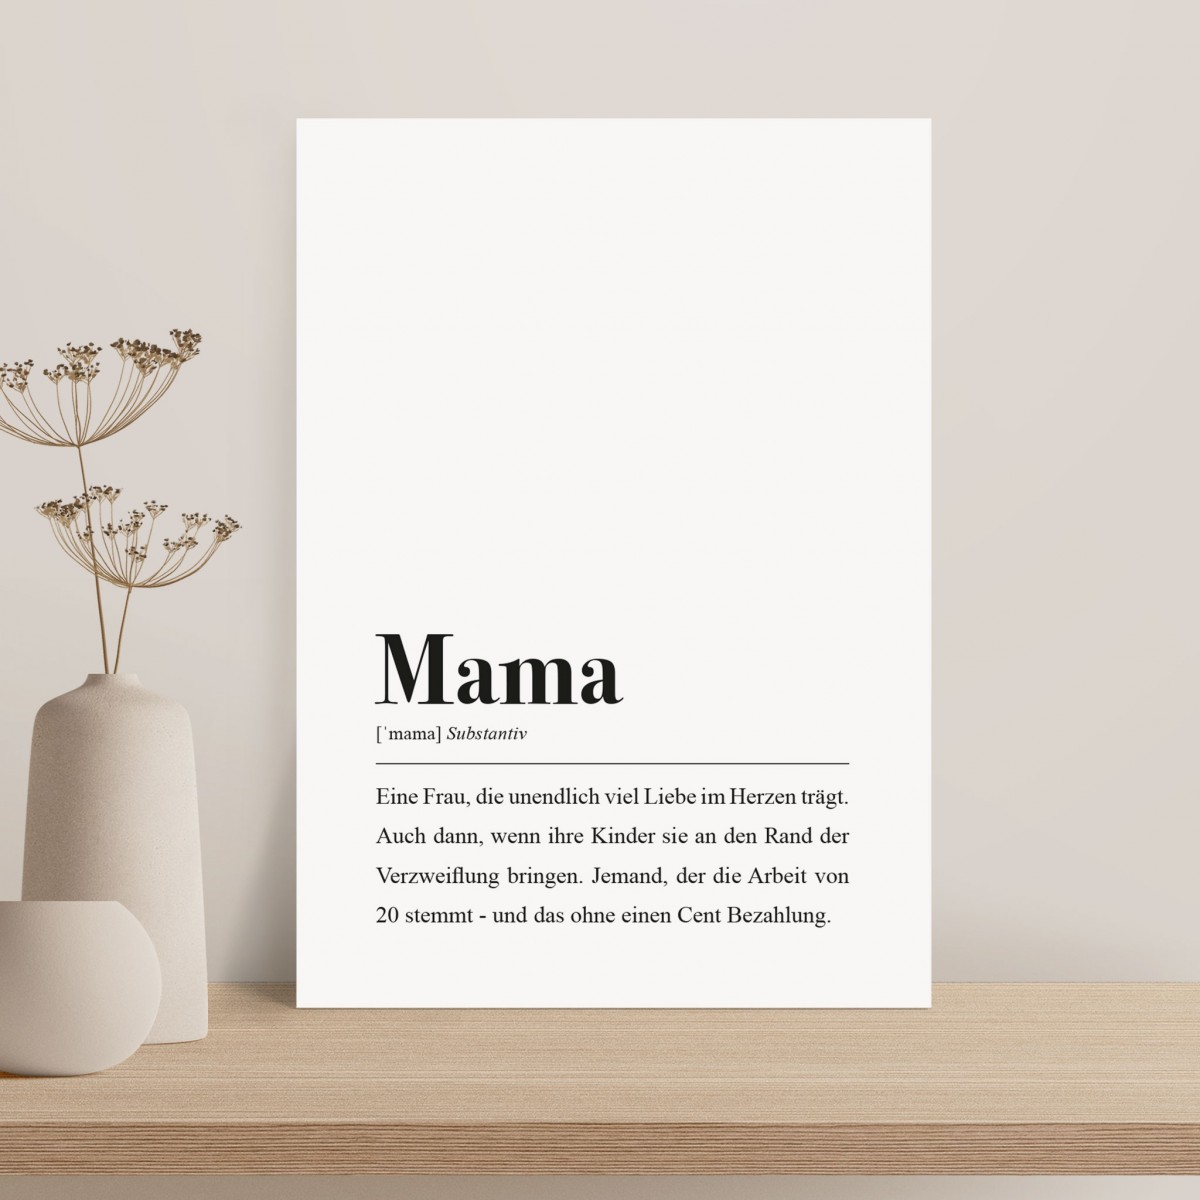 Mama Definition: DIN A4 Poster